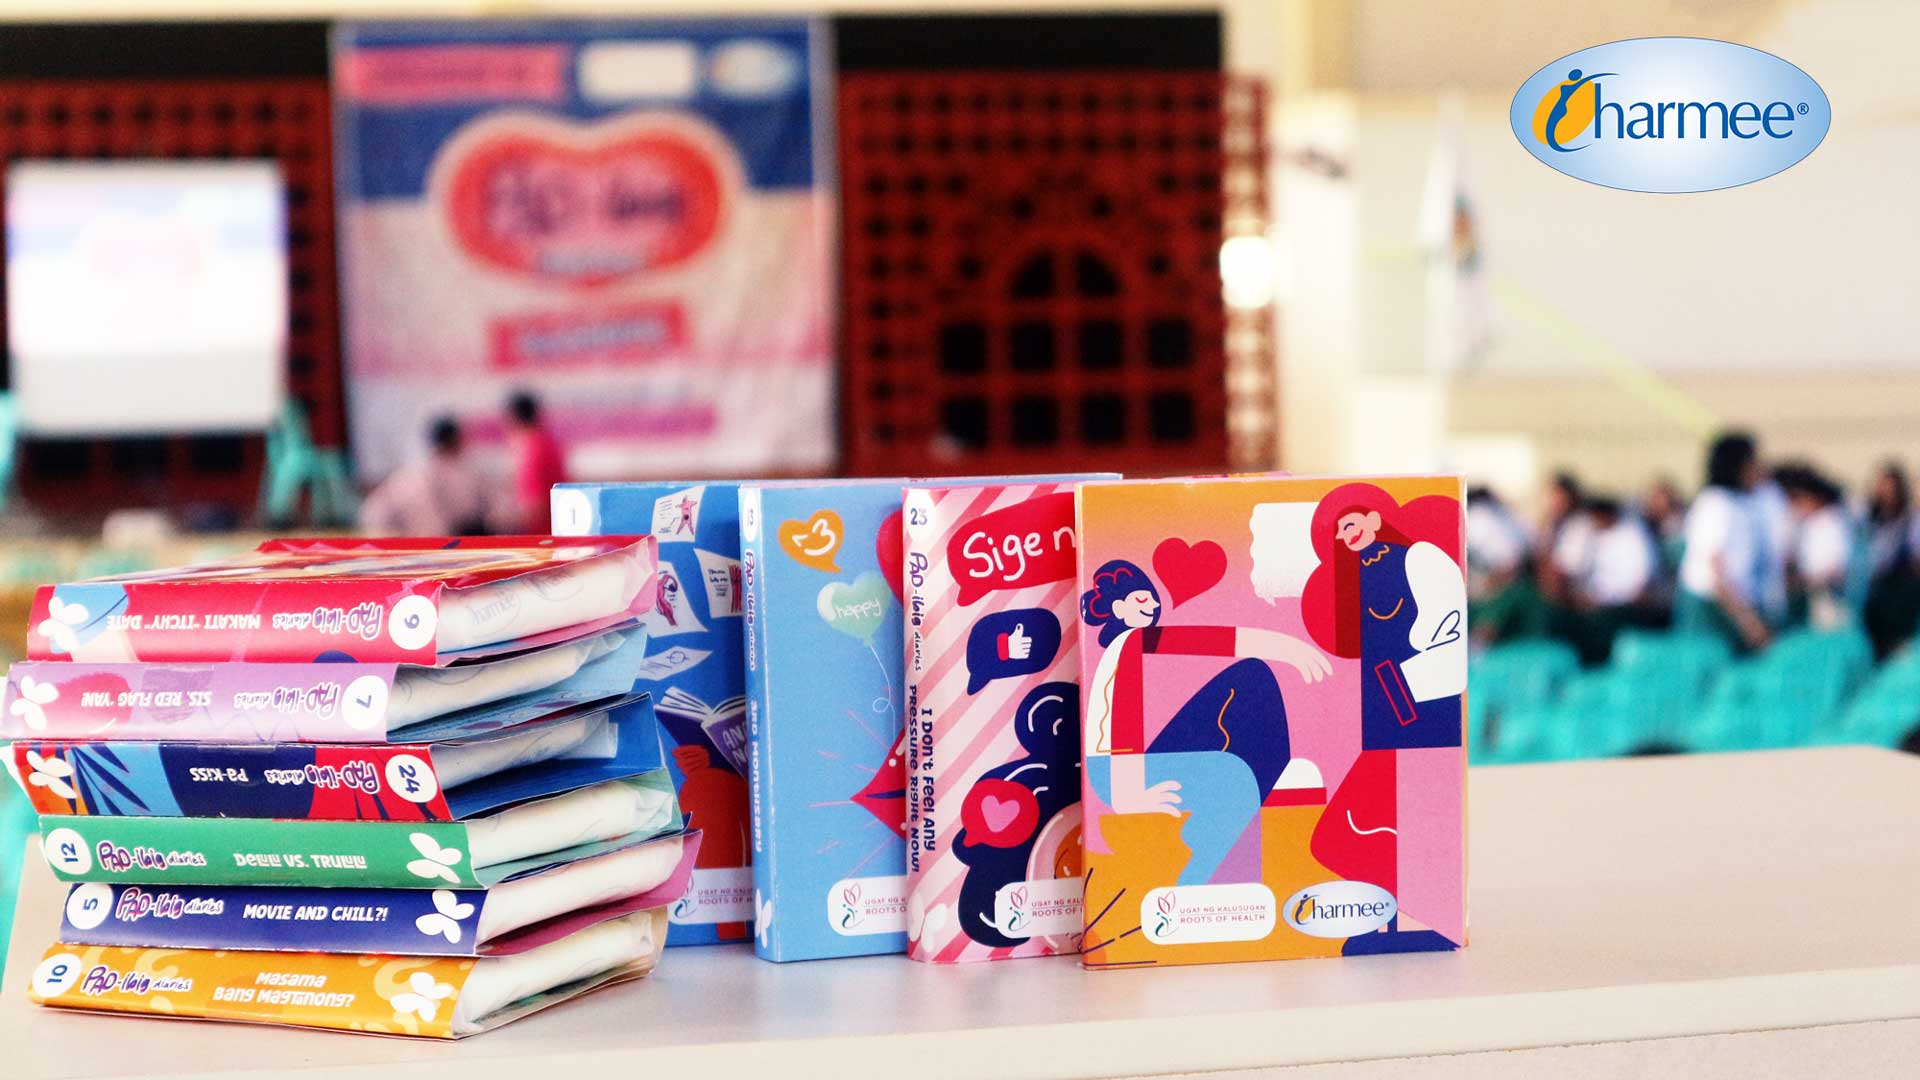 The PAD-ibig Diary has a total of 24 different diary designs and stories, all wrapped around CHARMEE feminine pads